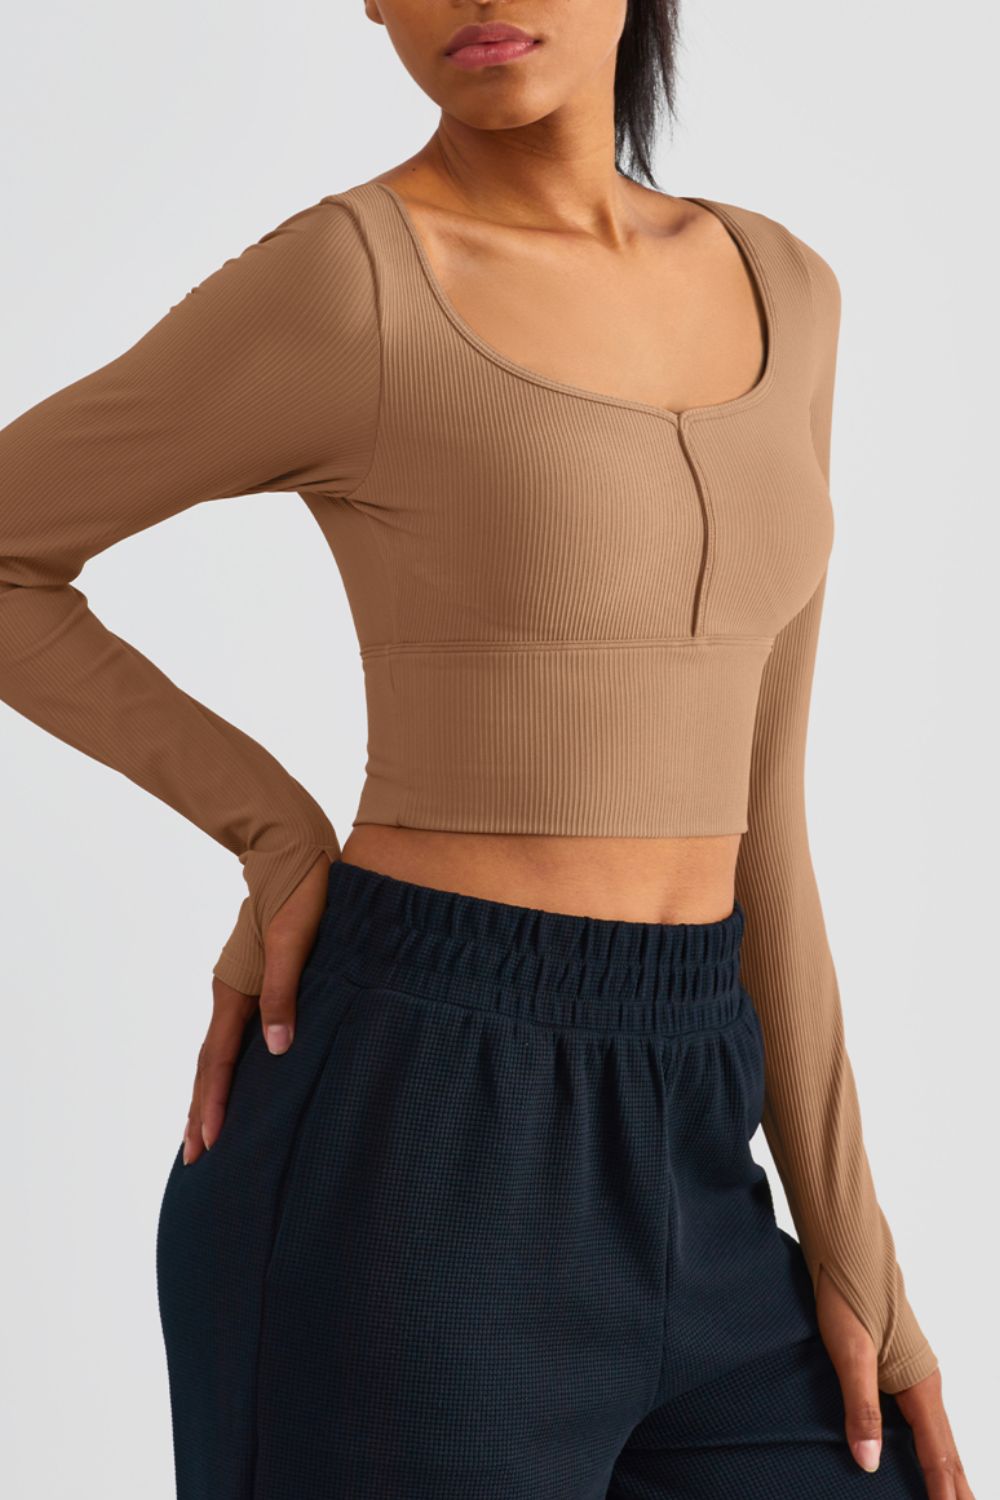 Tropic Pacific Scoop Neck Thumbhole Sleeve Cropped Sports Top